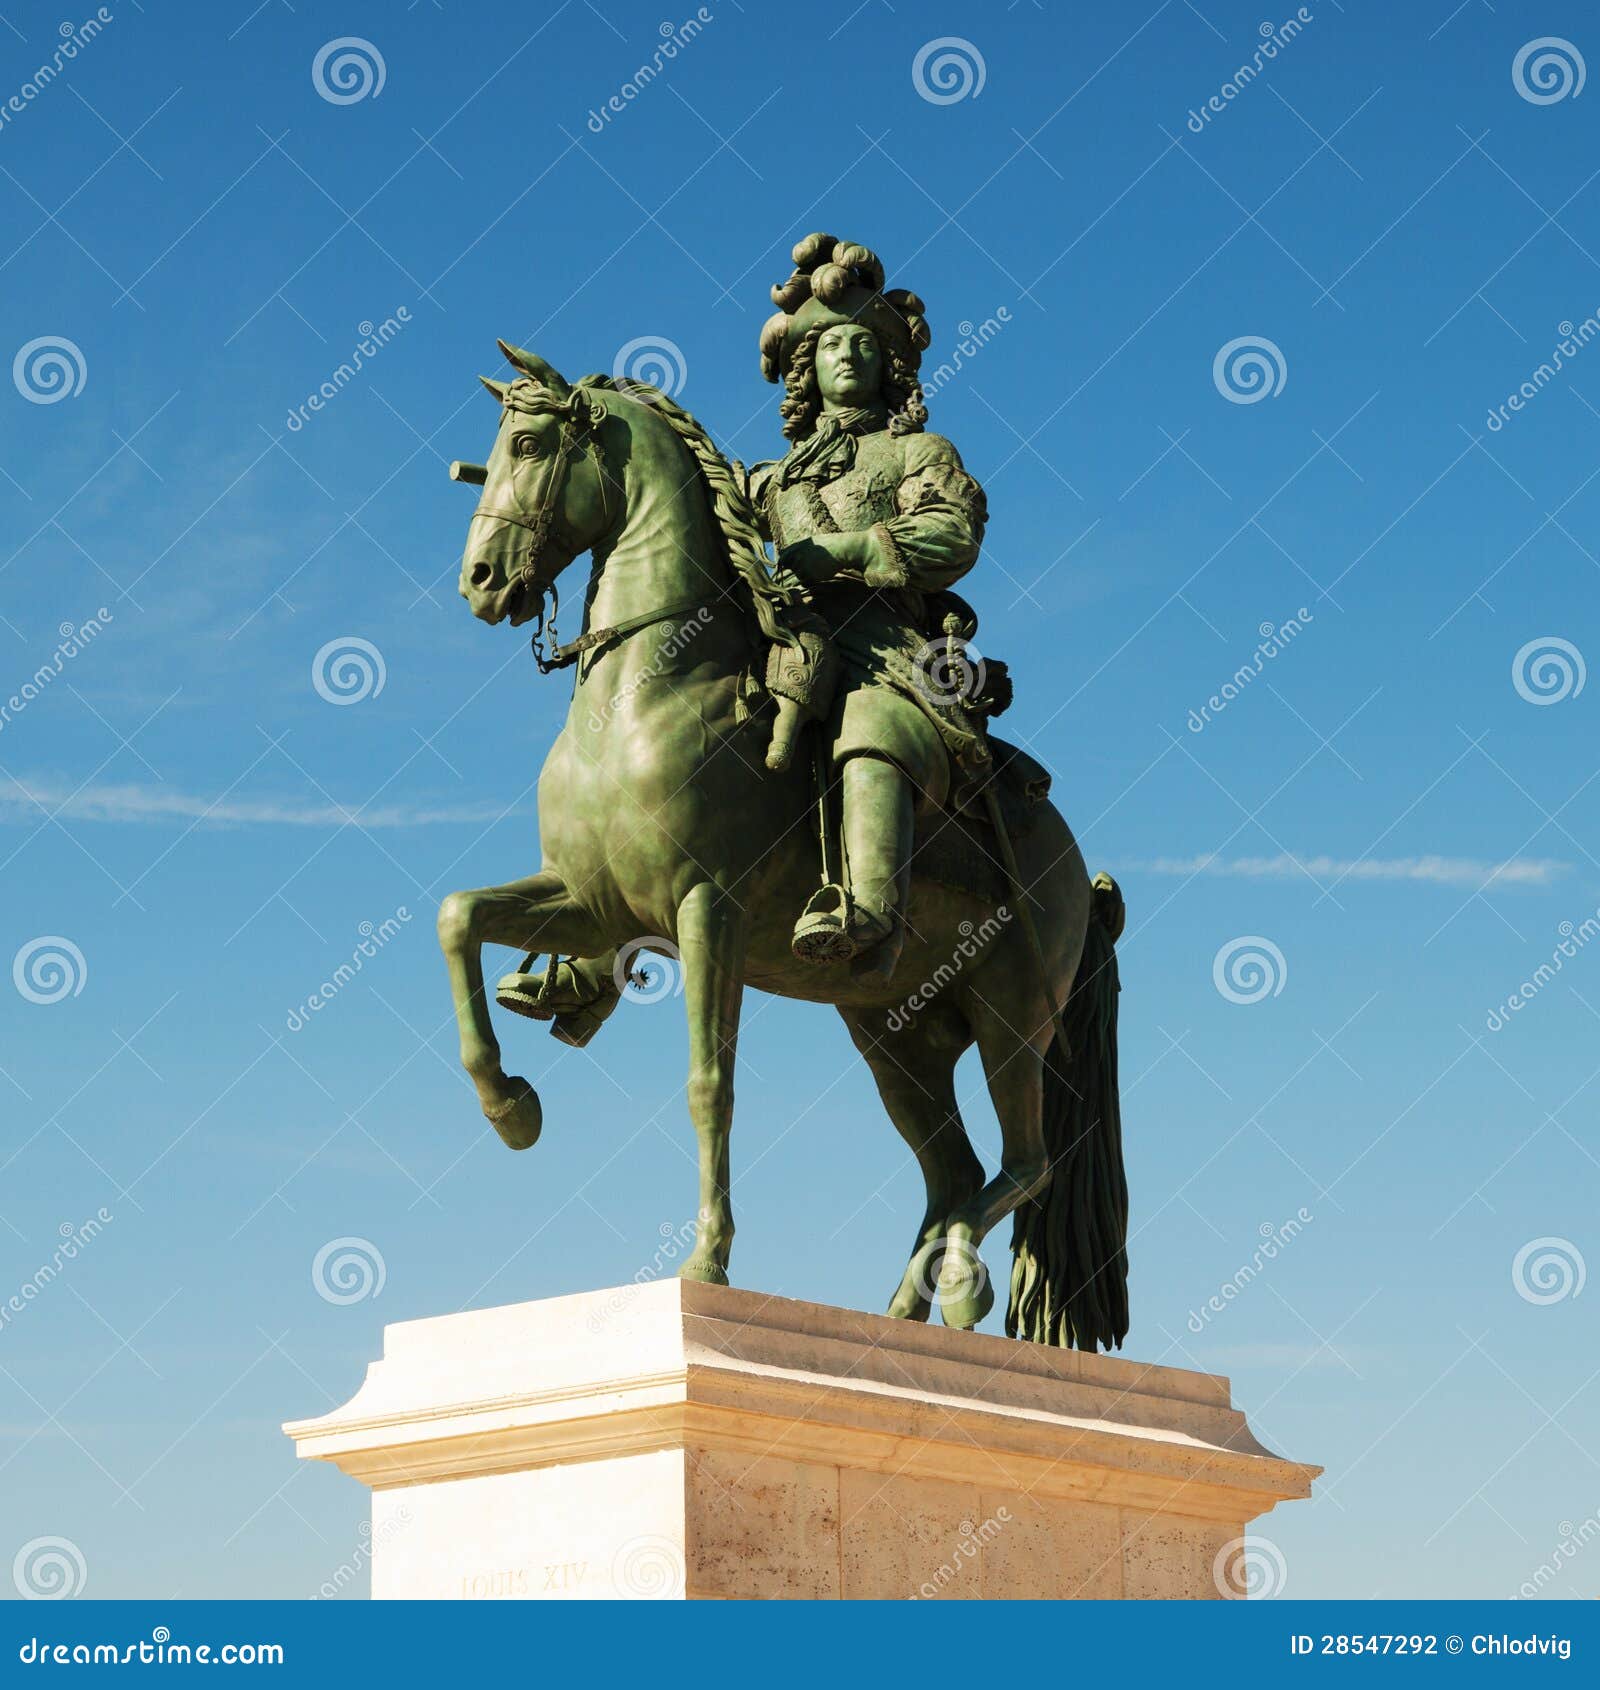 statue of louis xiv at versailles, france